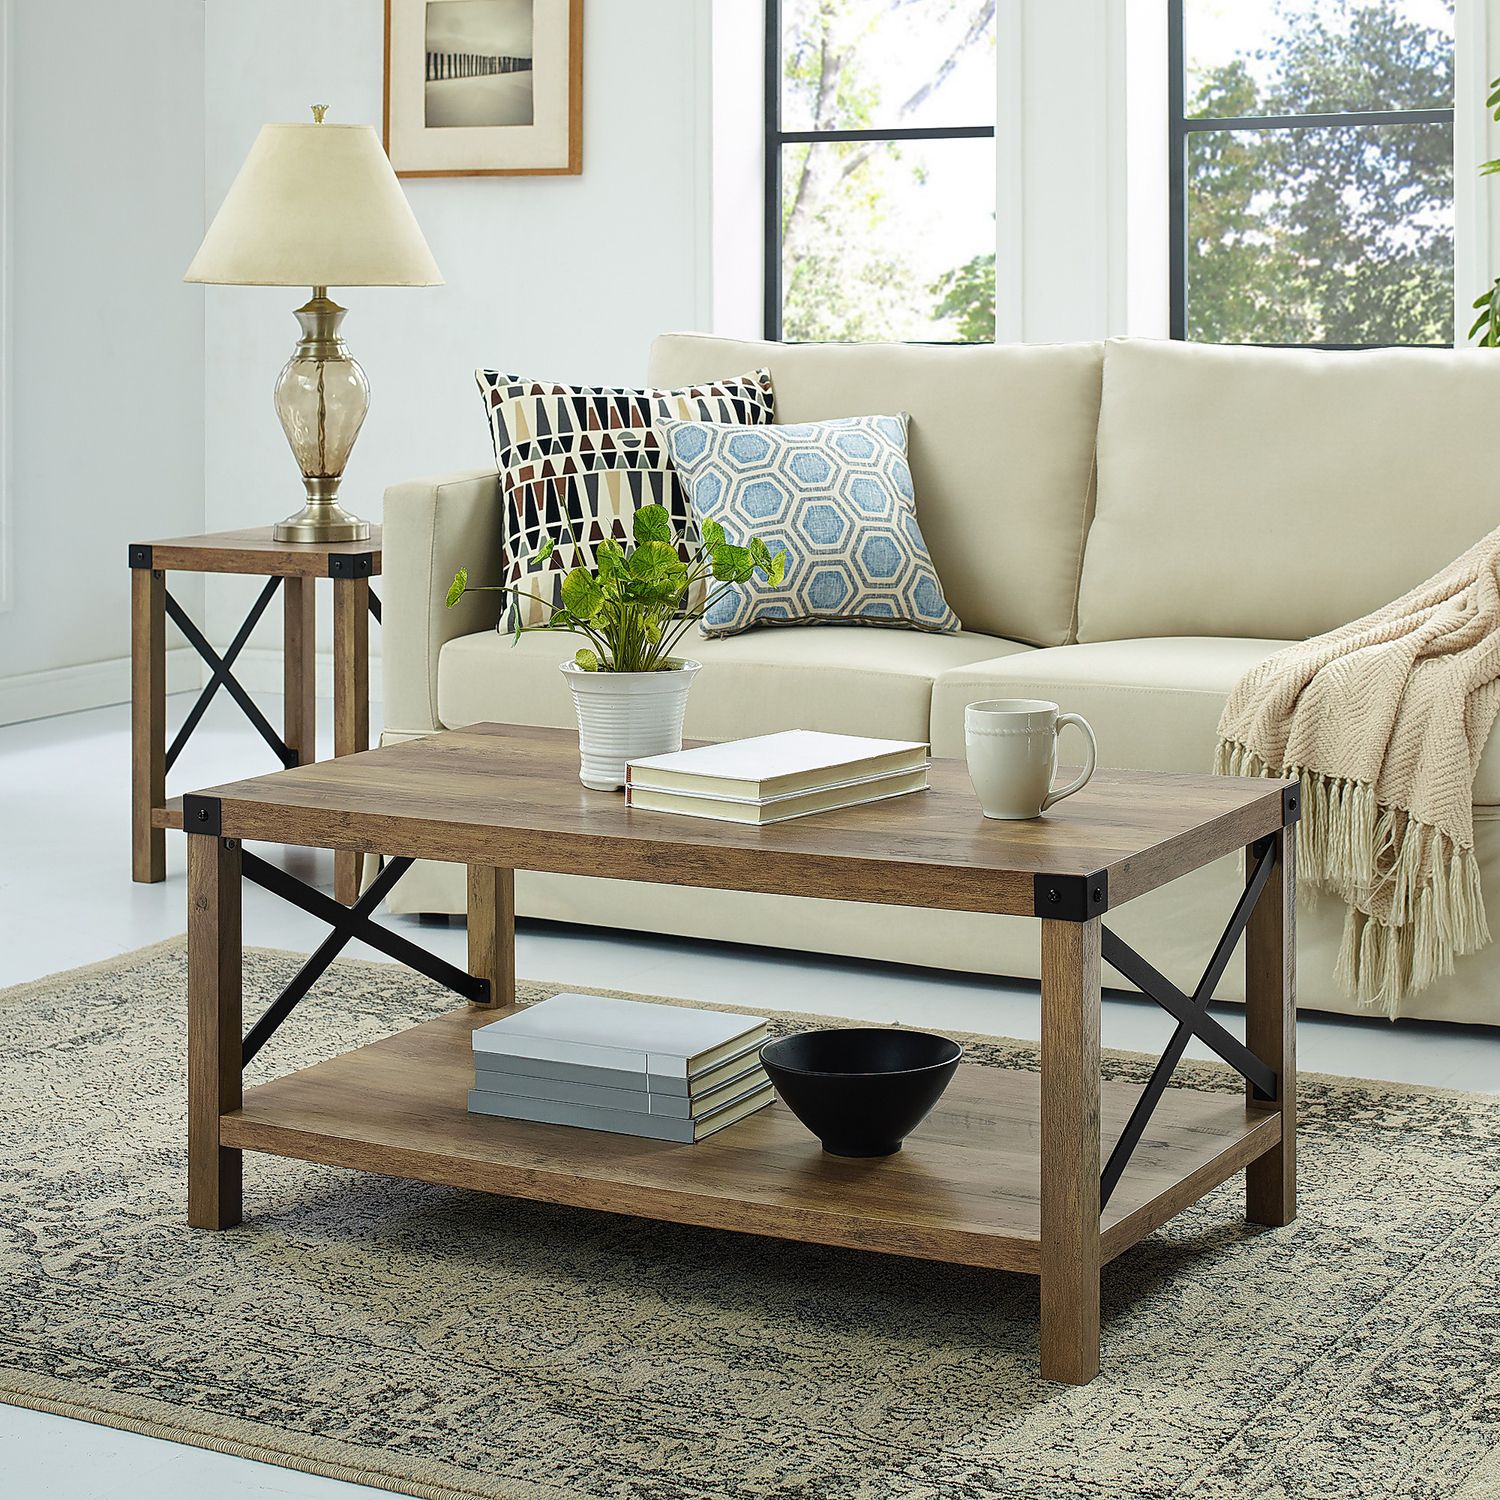 Modern Farmhouse Coffee Table Sets Intended For Current Modern Farmhouse Coffee Table – Pier (View 3 of 15)